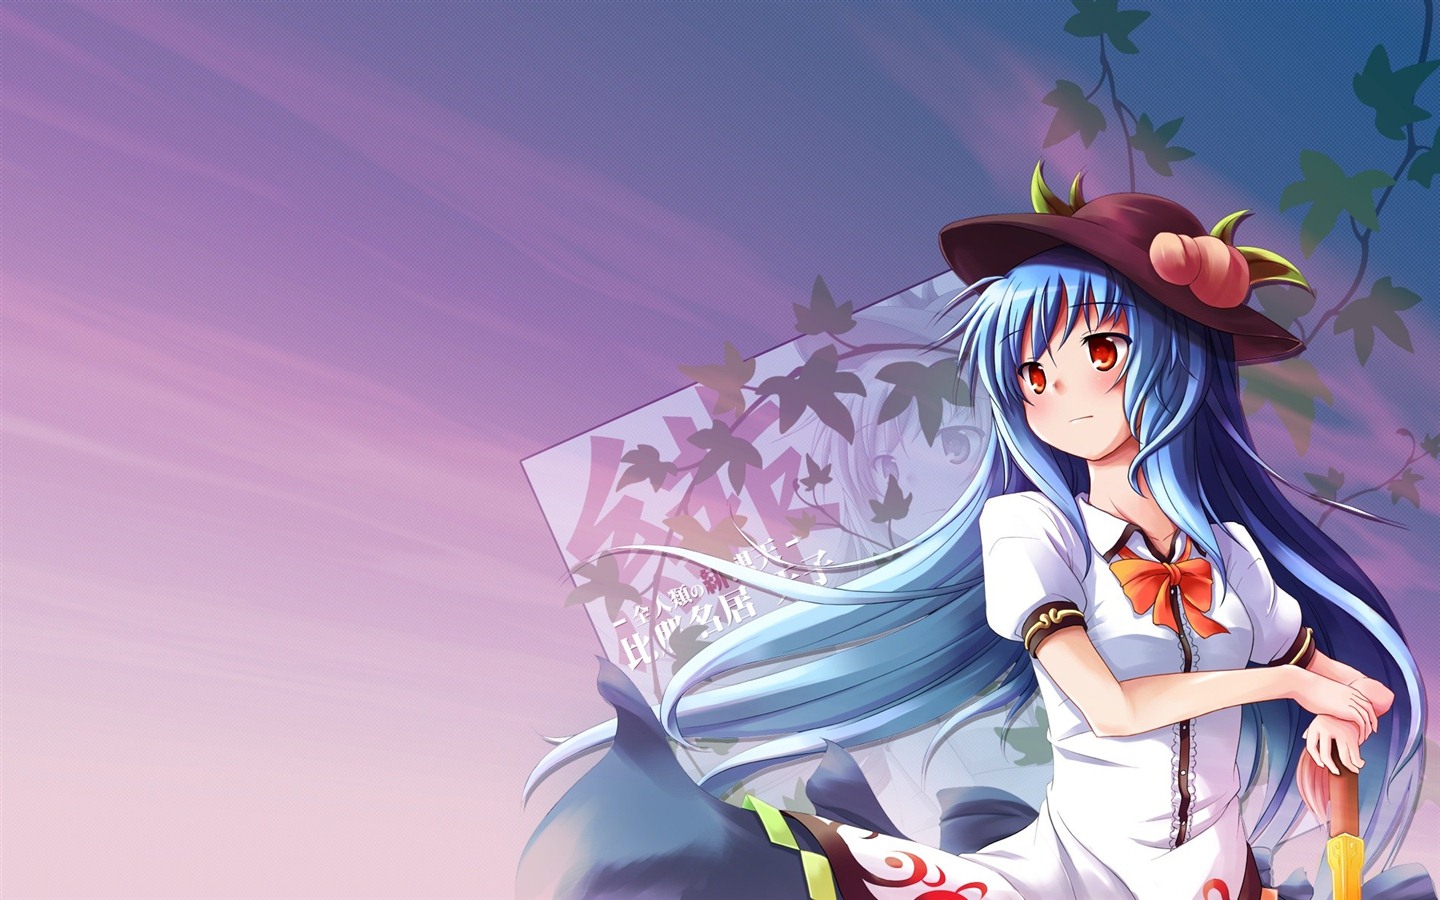 Touhou Project caricature HD wallpapers #16 - 1440x900